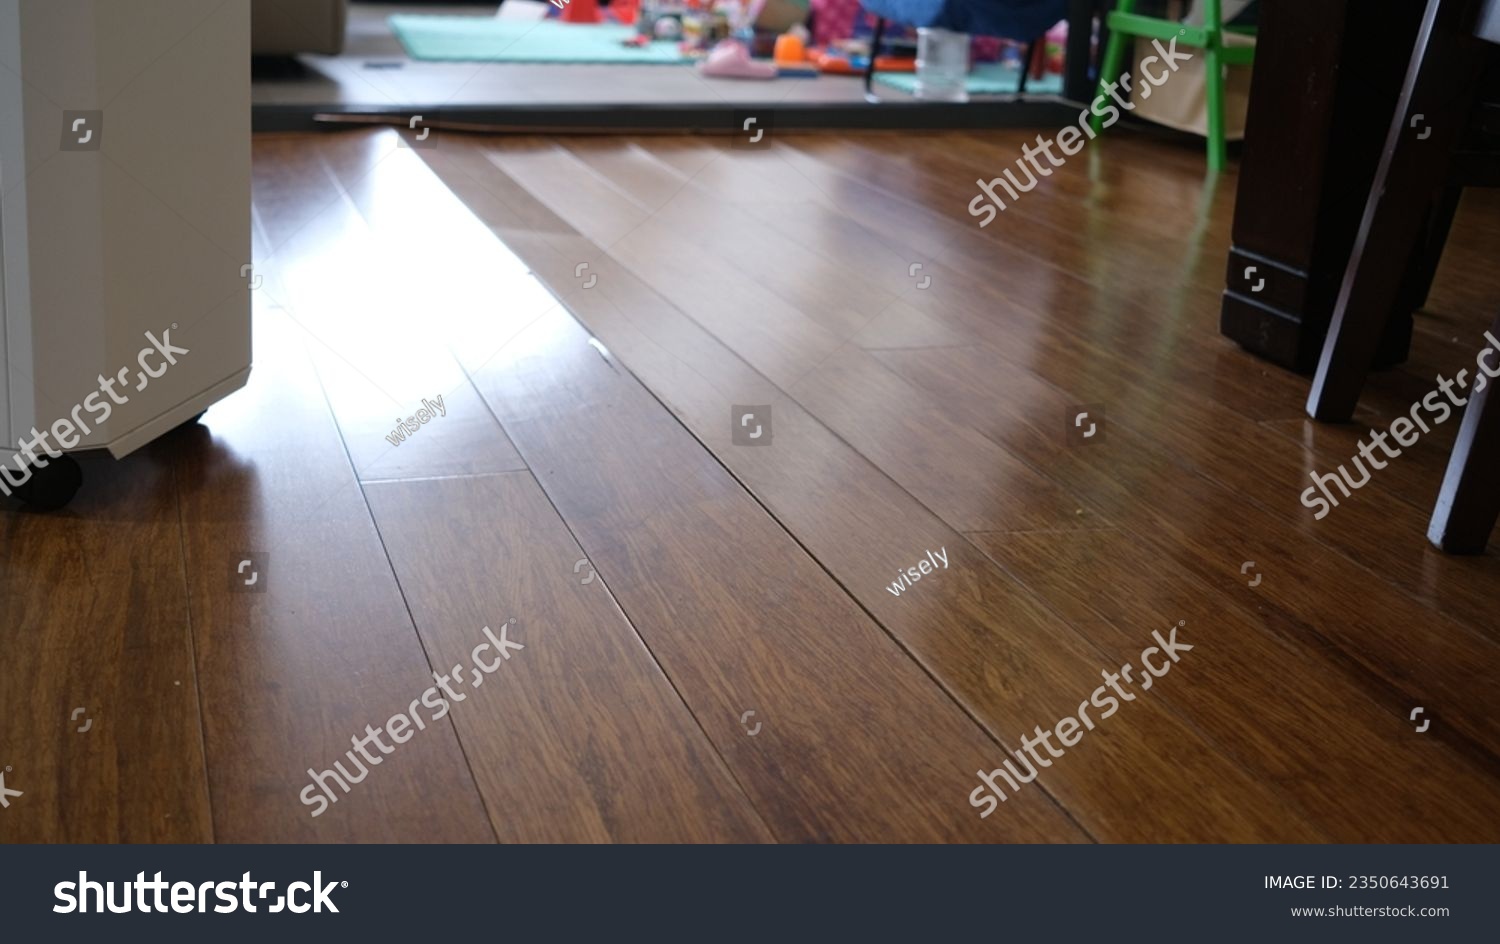 Corrugated wooden floor due to expansion at Living room. #2350643691